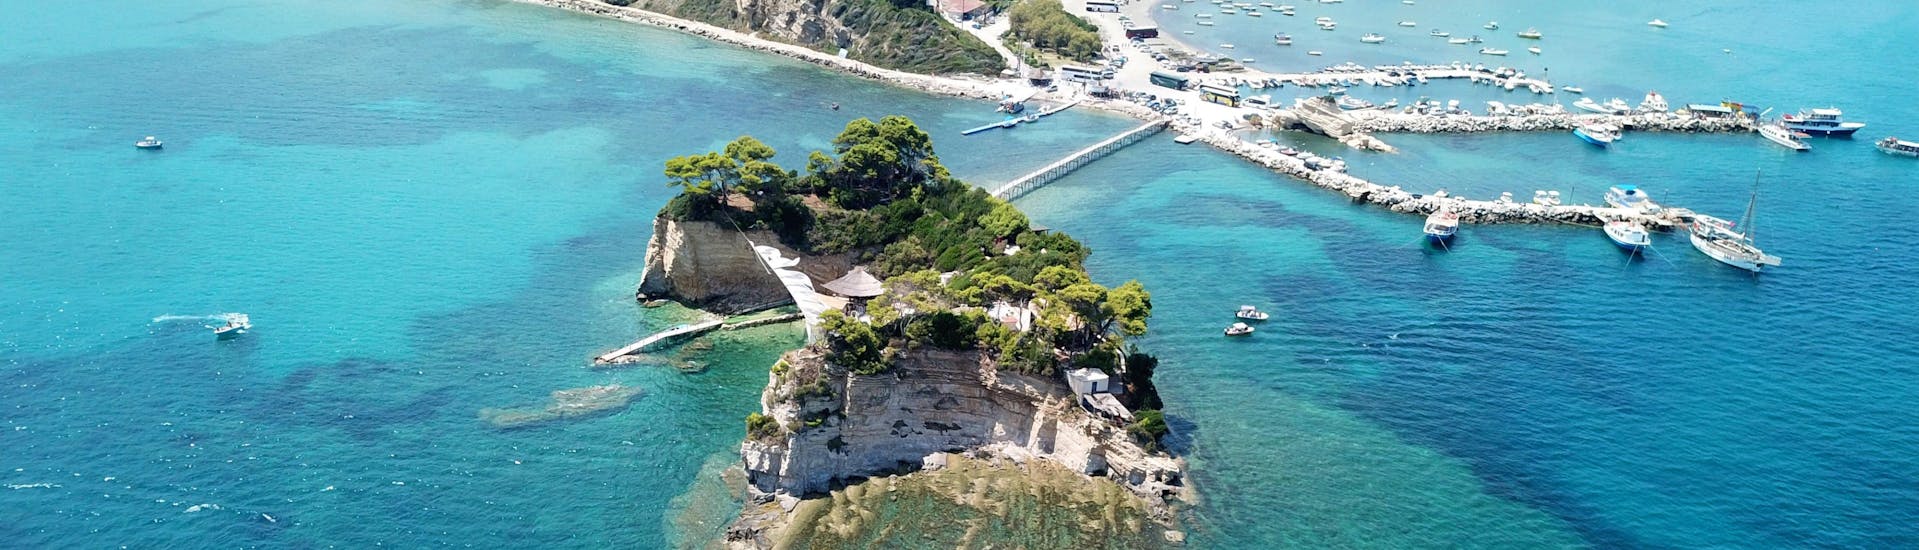 Top view of Laganas bay, Zakynthos, with the wooden bridge to Cameo Island. 